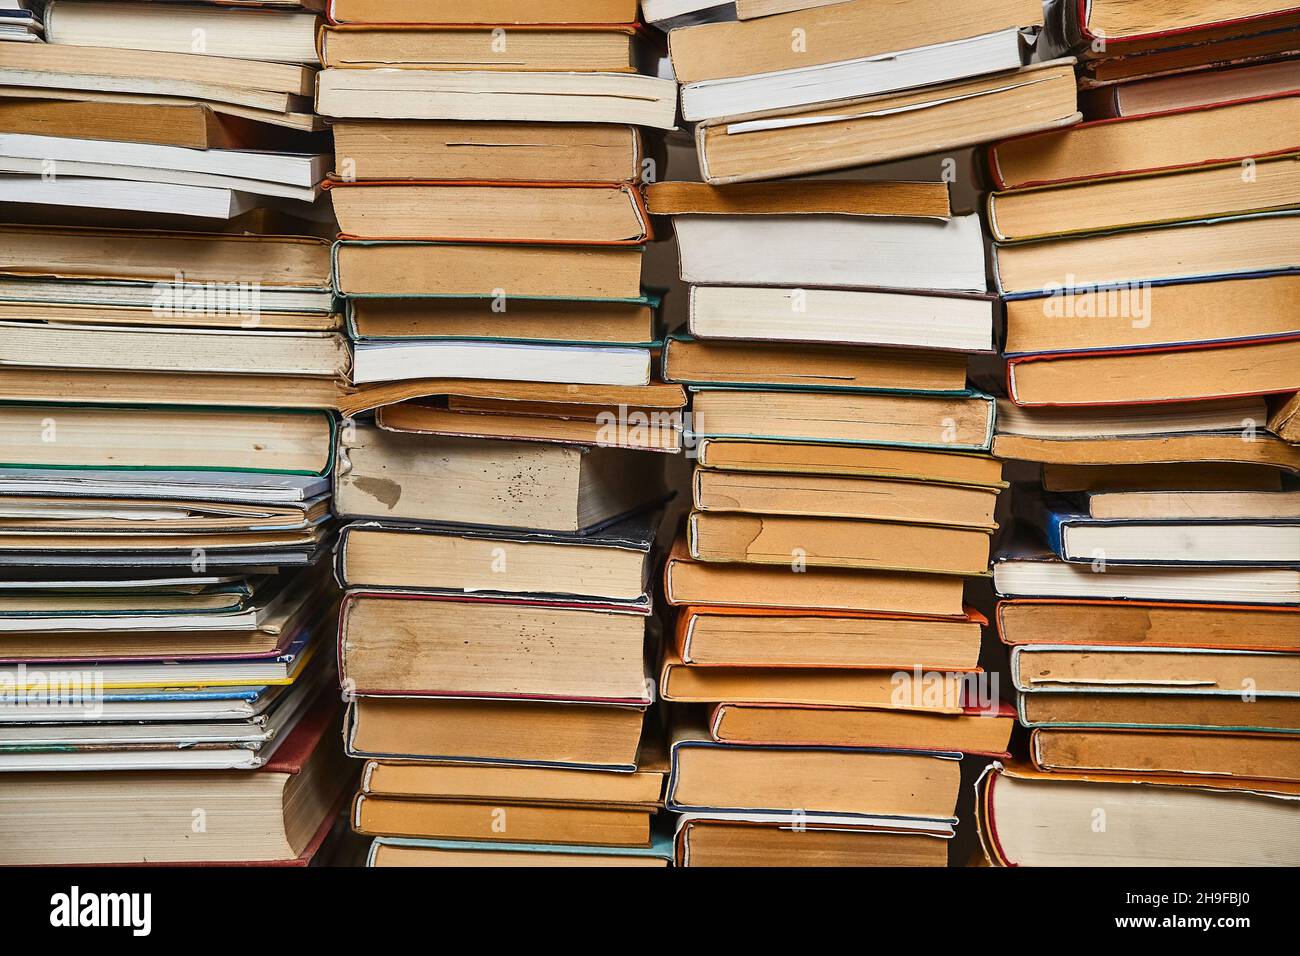 Wall of books piled up Stock Photo